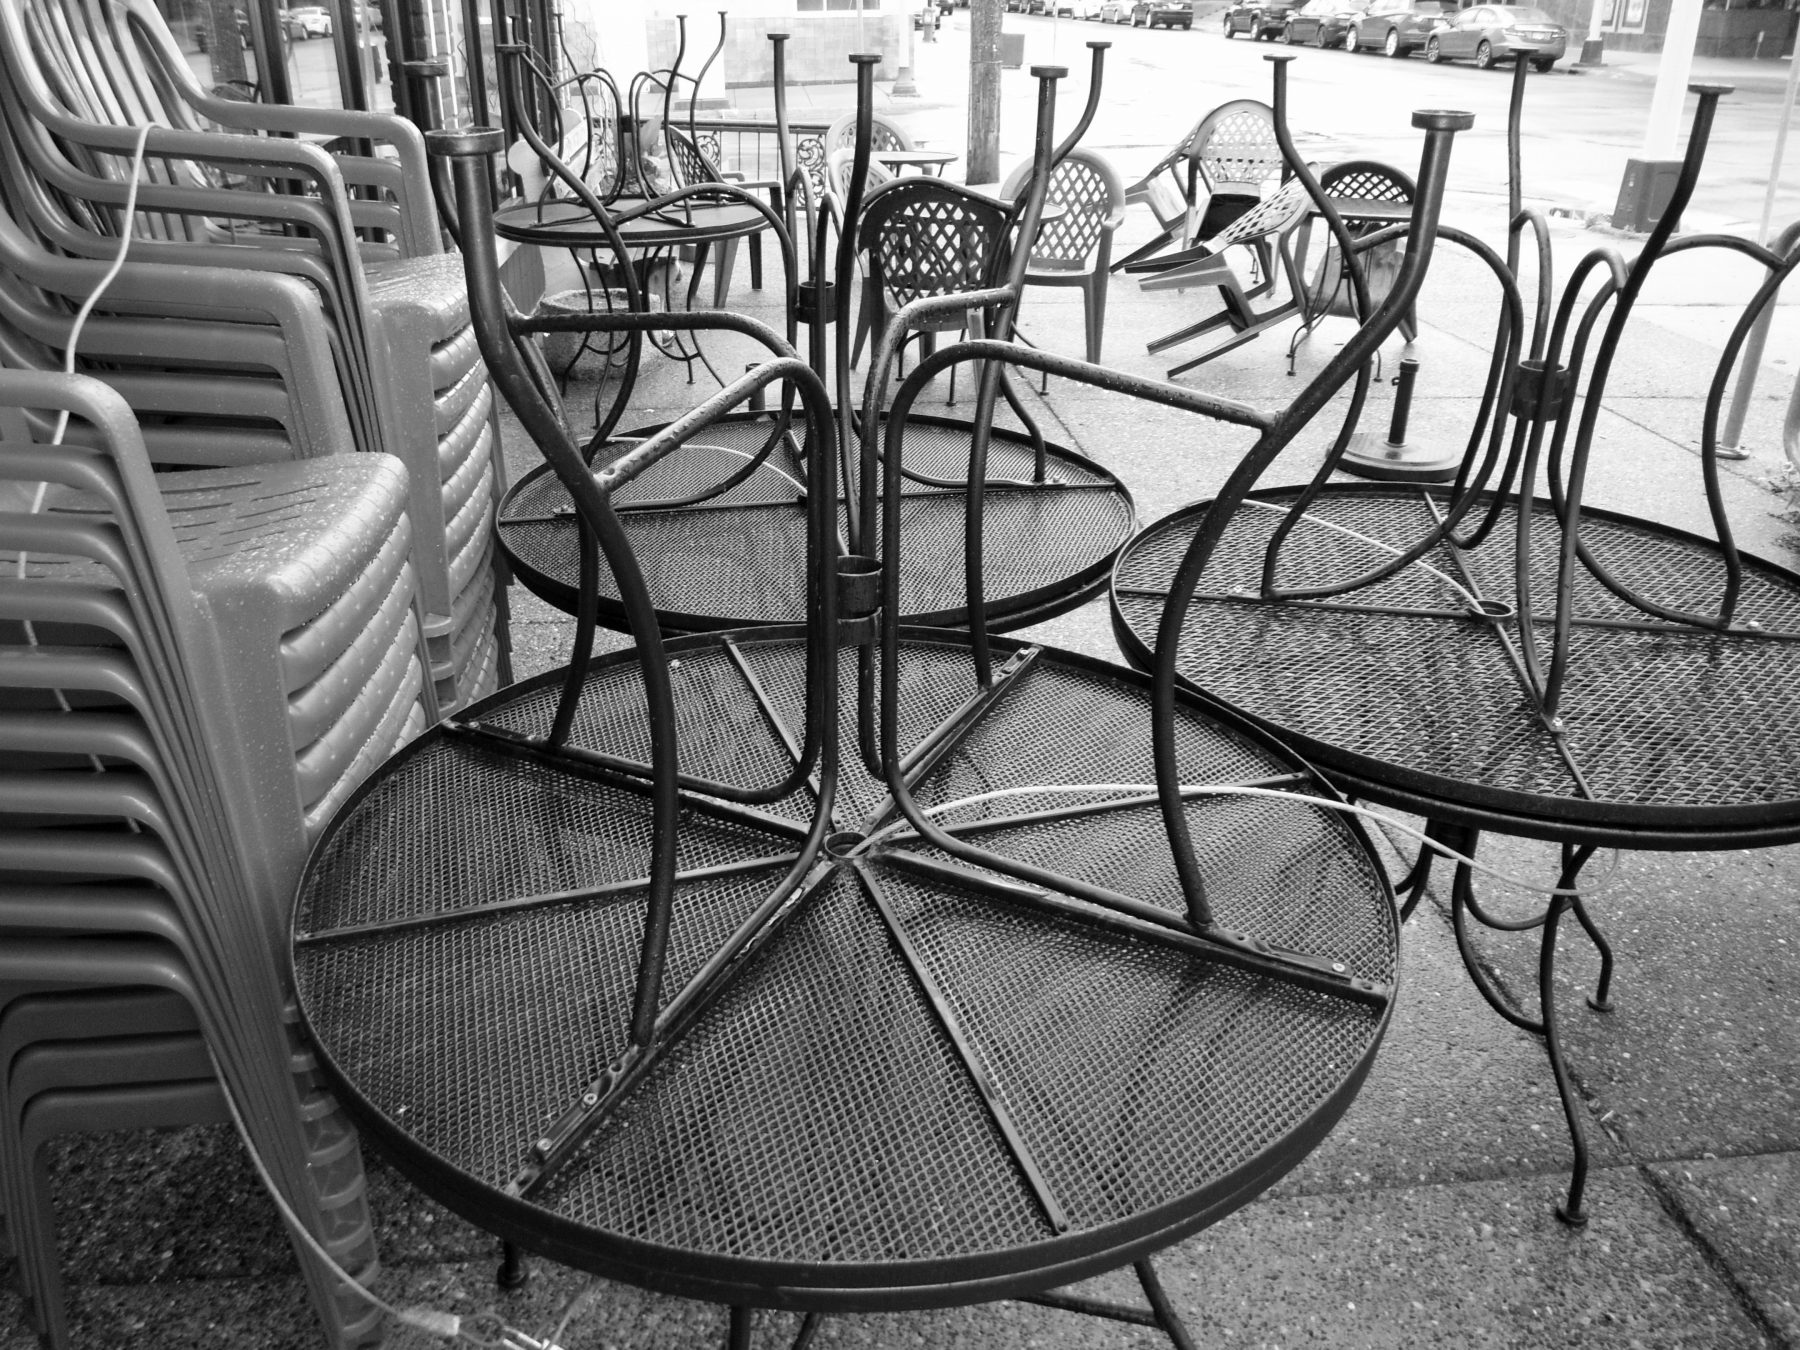 chairs_and_tables_tilted_up_in_rain_riverview_cafe_mpls_mn_19_bw_b15